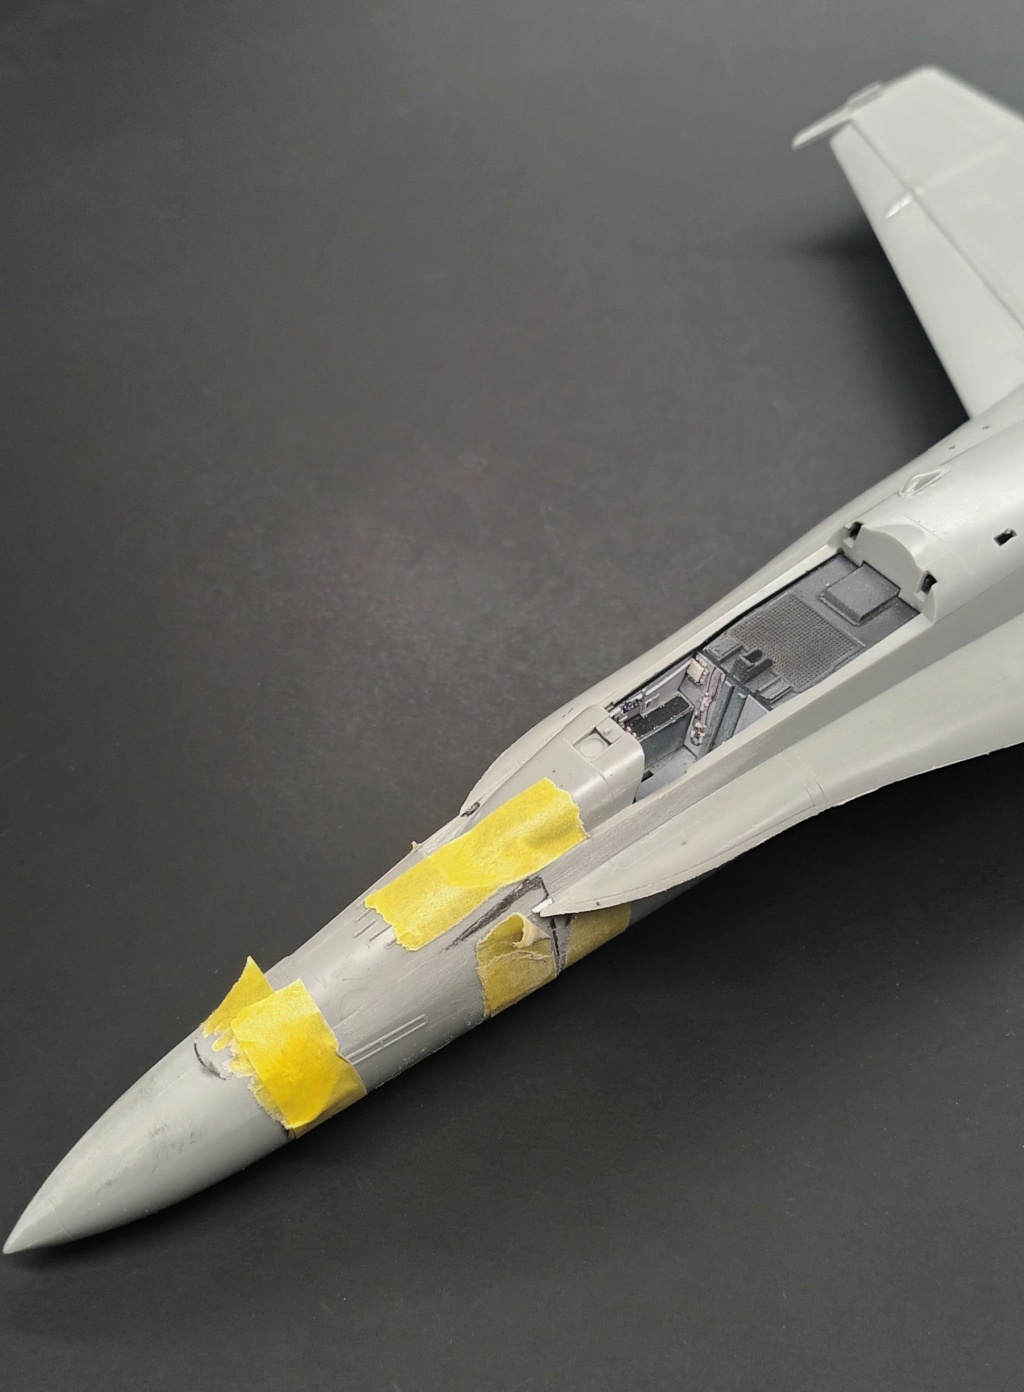 [Kinetic] 1/48  - McDonnell F/A-18A+ Hornet- VFC 12   / Double  [Tamiya] General Dynamics F-16C Fighting Falcon - 64th AGRS  1/48  - Aggressor - Page 4 20240229